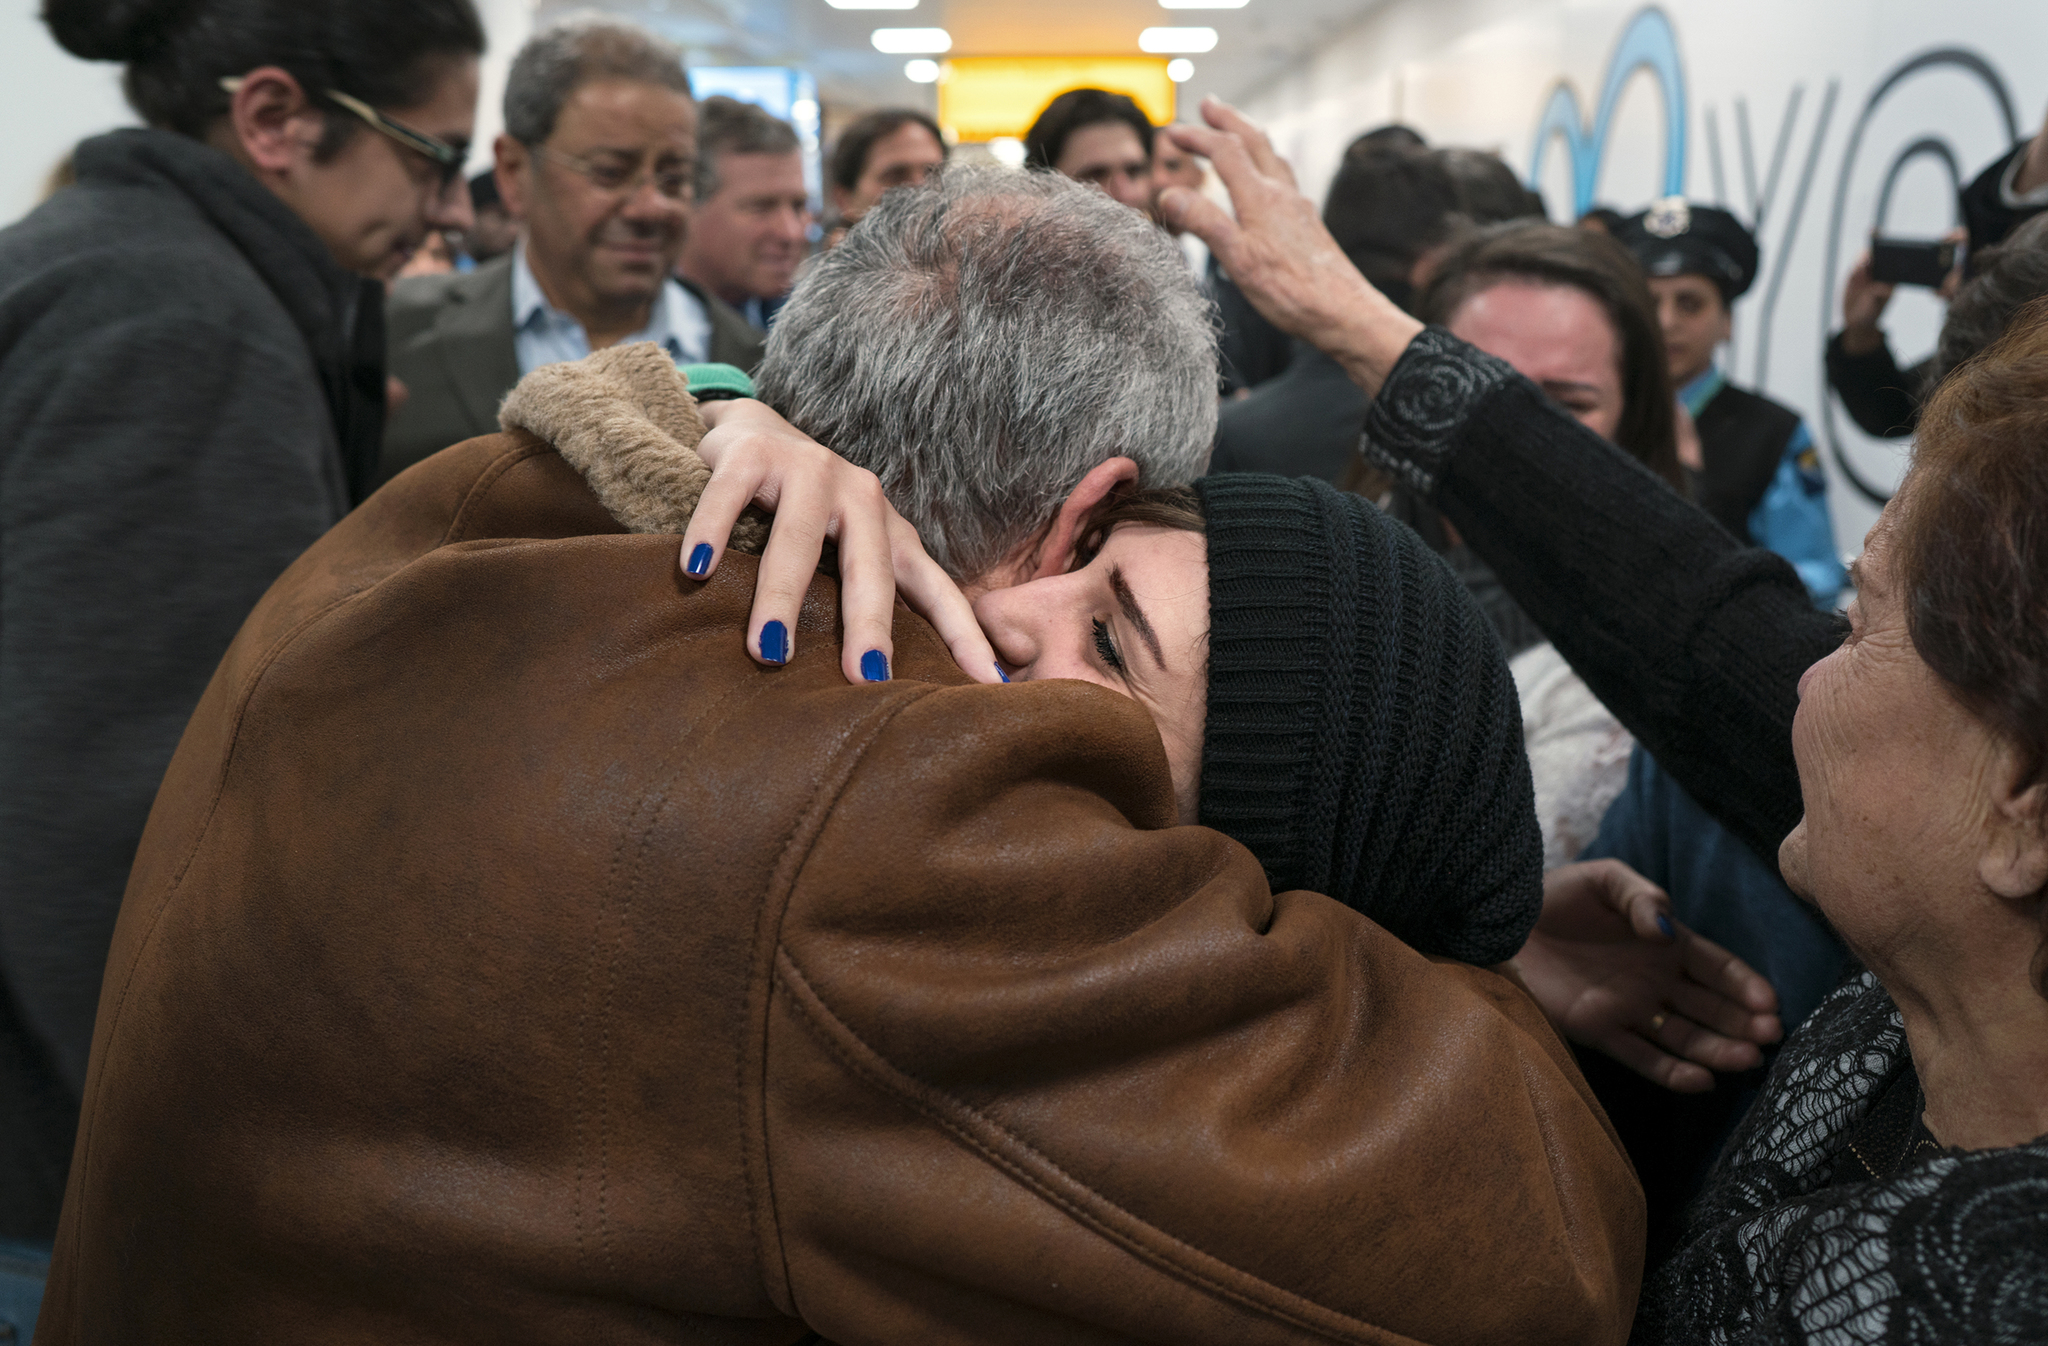 In a Monday, Feb. 6, 2017 photo, family members who have just arrived from Syria embrace and are greeted by family who live in the United States upon their arrival at John F. Kennedy International Airport in New York. Organizers in cities across the U.S. are telling immigrants to miss class, miss work and not shop on Thursday, Feb. 16, 2017, as a way to show the country how important they are to America’s economy and way of life. “A Day Without Immigrants” actions are planned in cities including Philadelphia, Washington, Boston and Austin, Texas. (Craig Ruttle | The Associated Press)